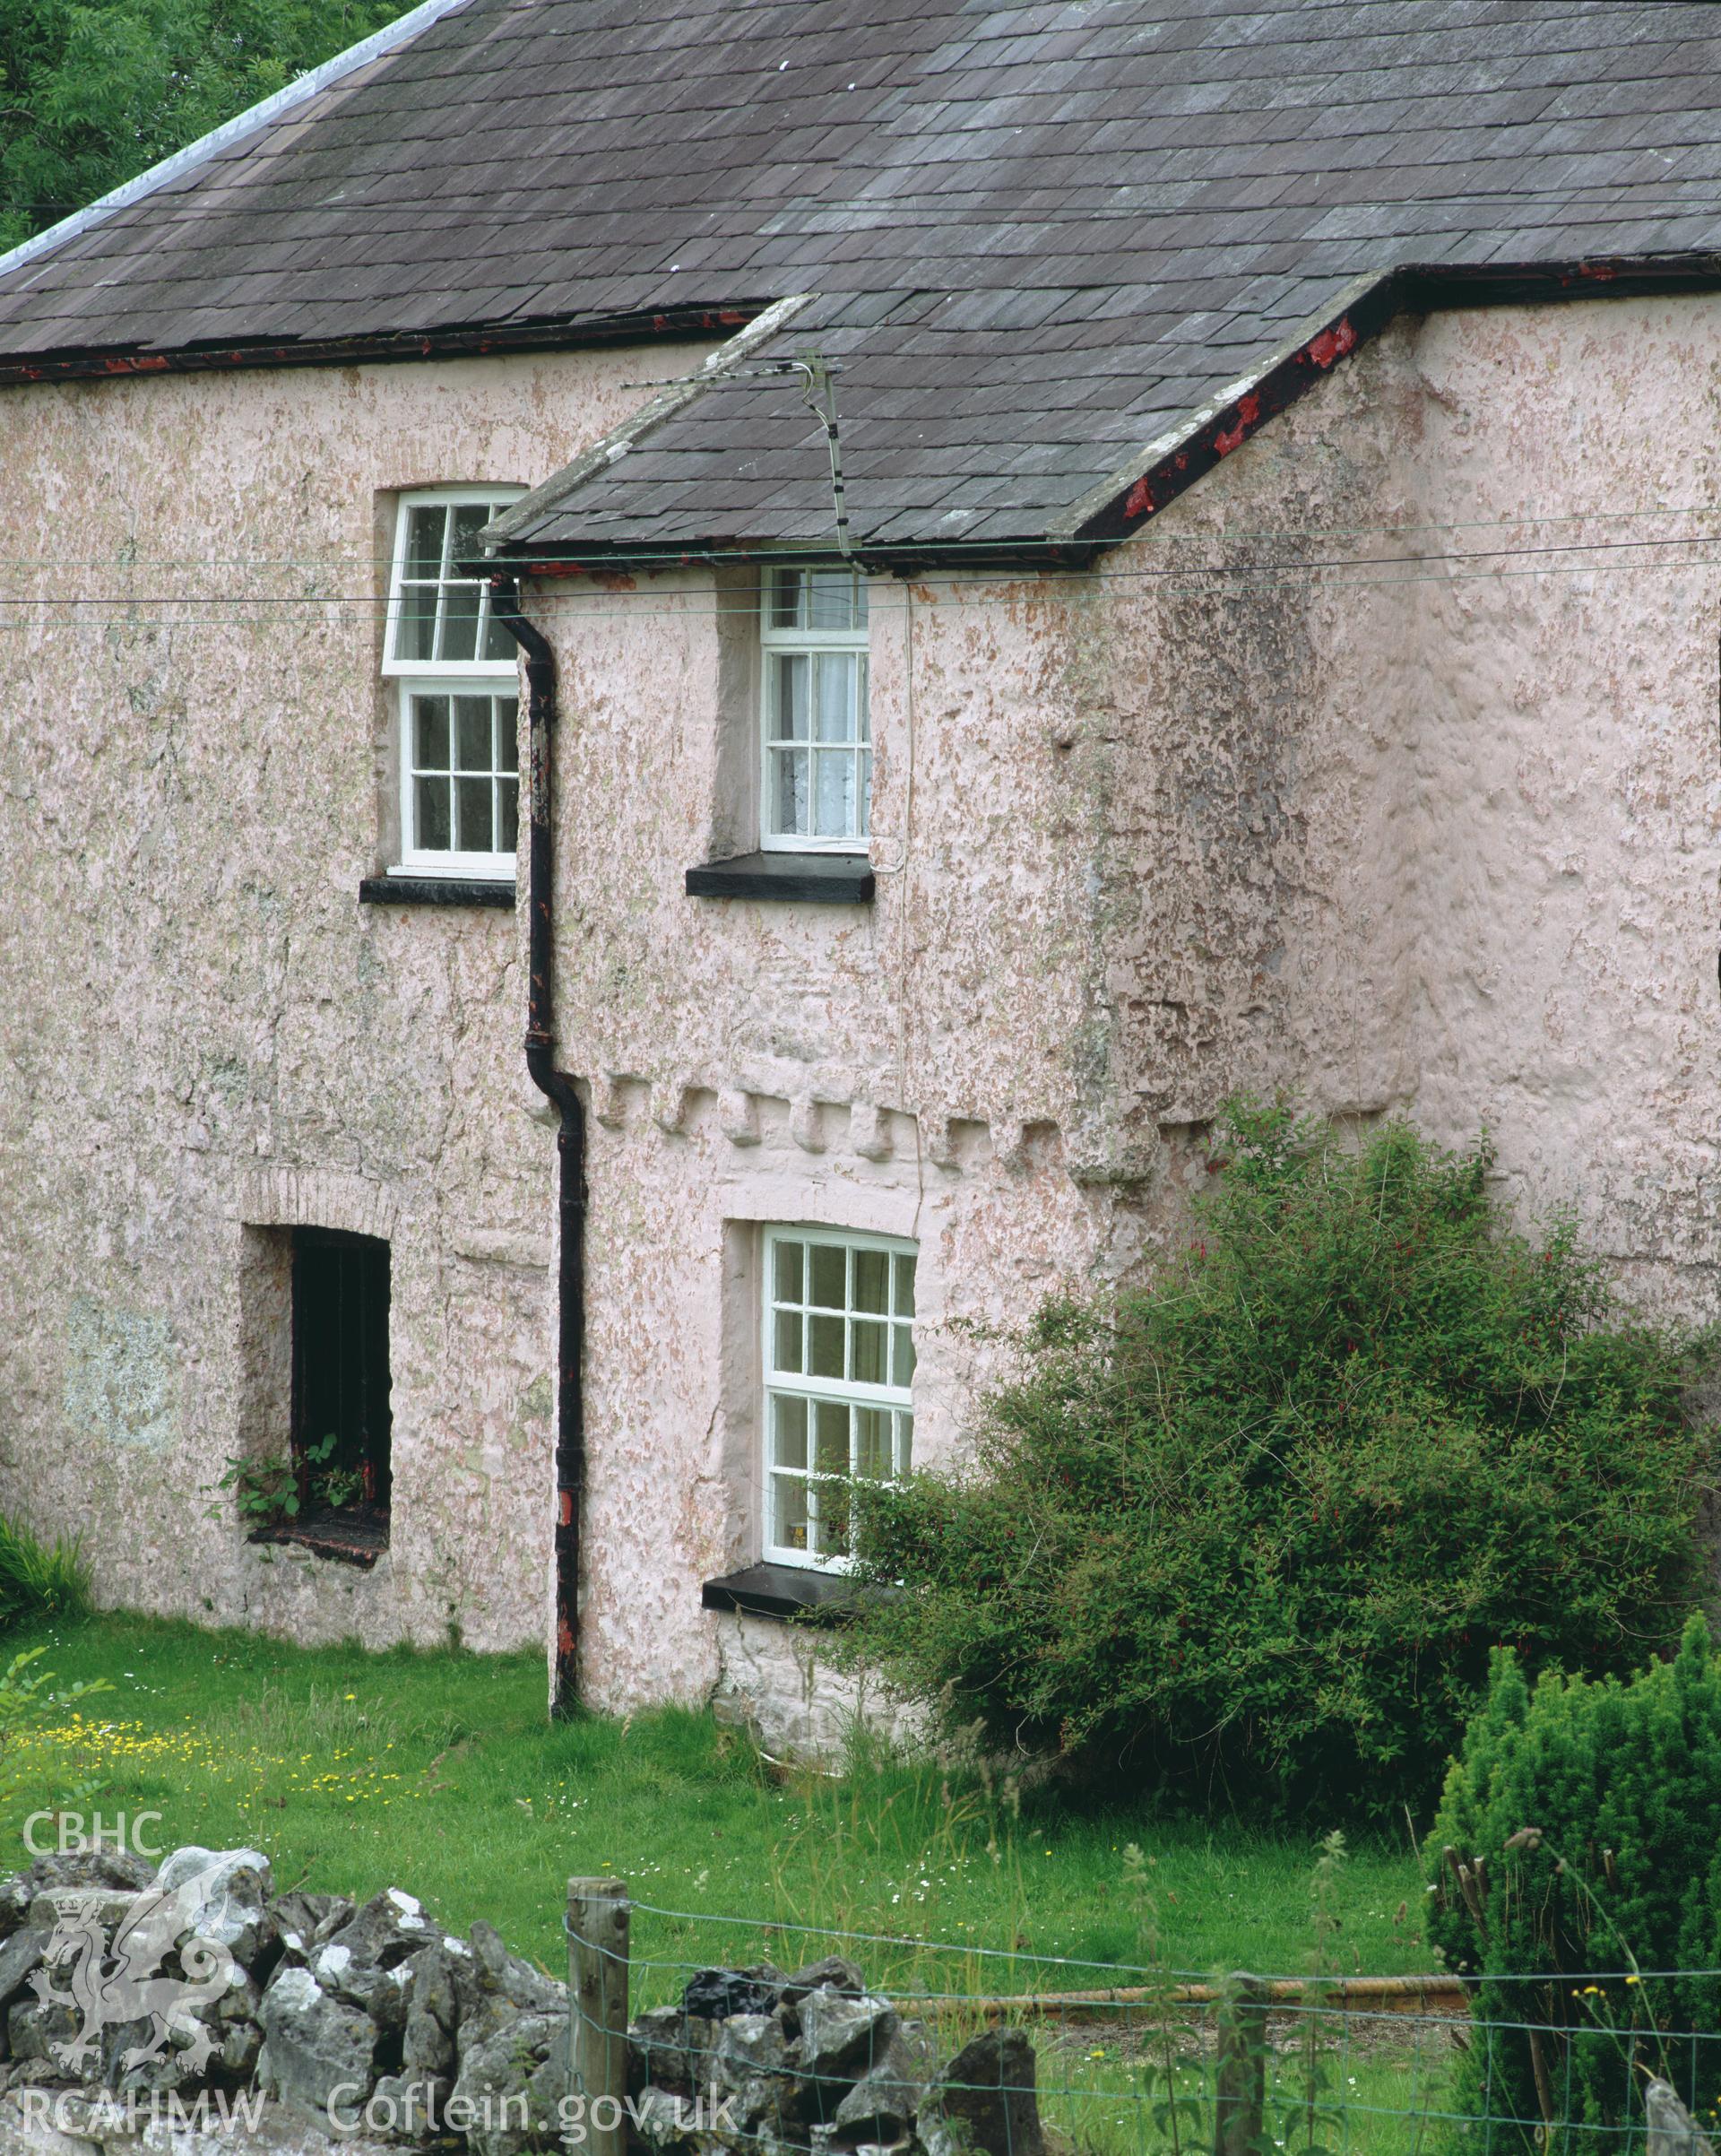 Colour transparency showing an exterior view of Cwrt Bryn-y-Beirdd, Dyffryn Cennen , produced by Iain Wright, June 2004.